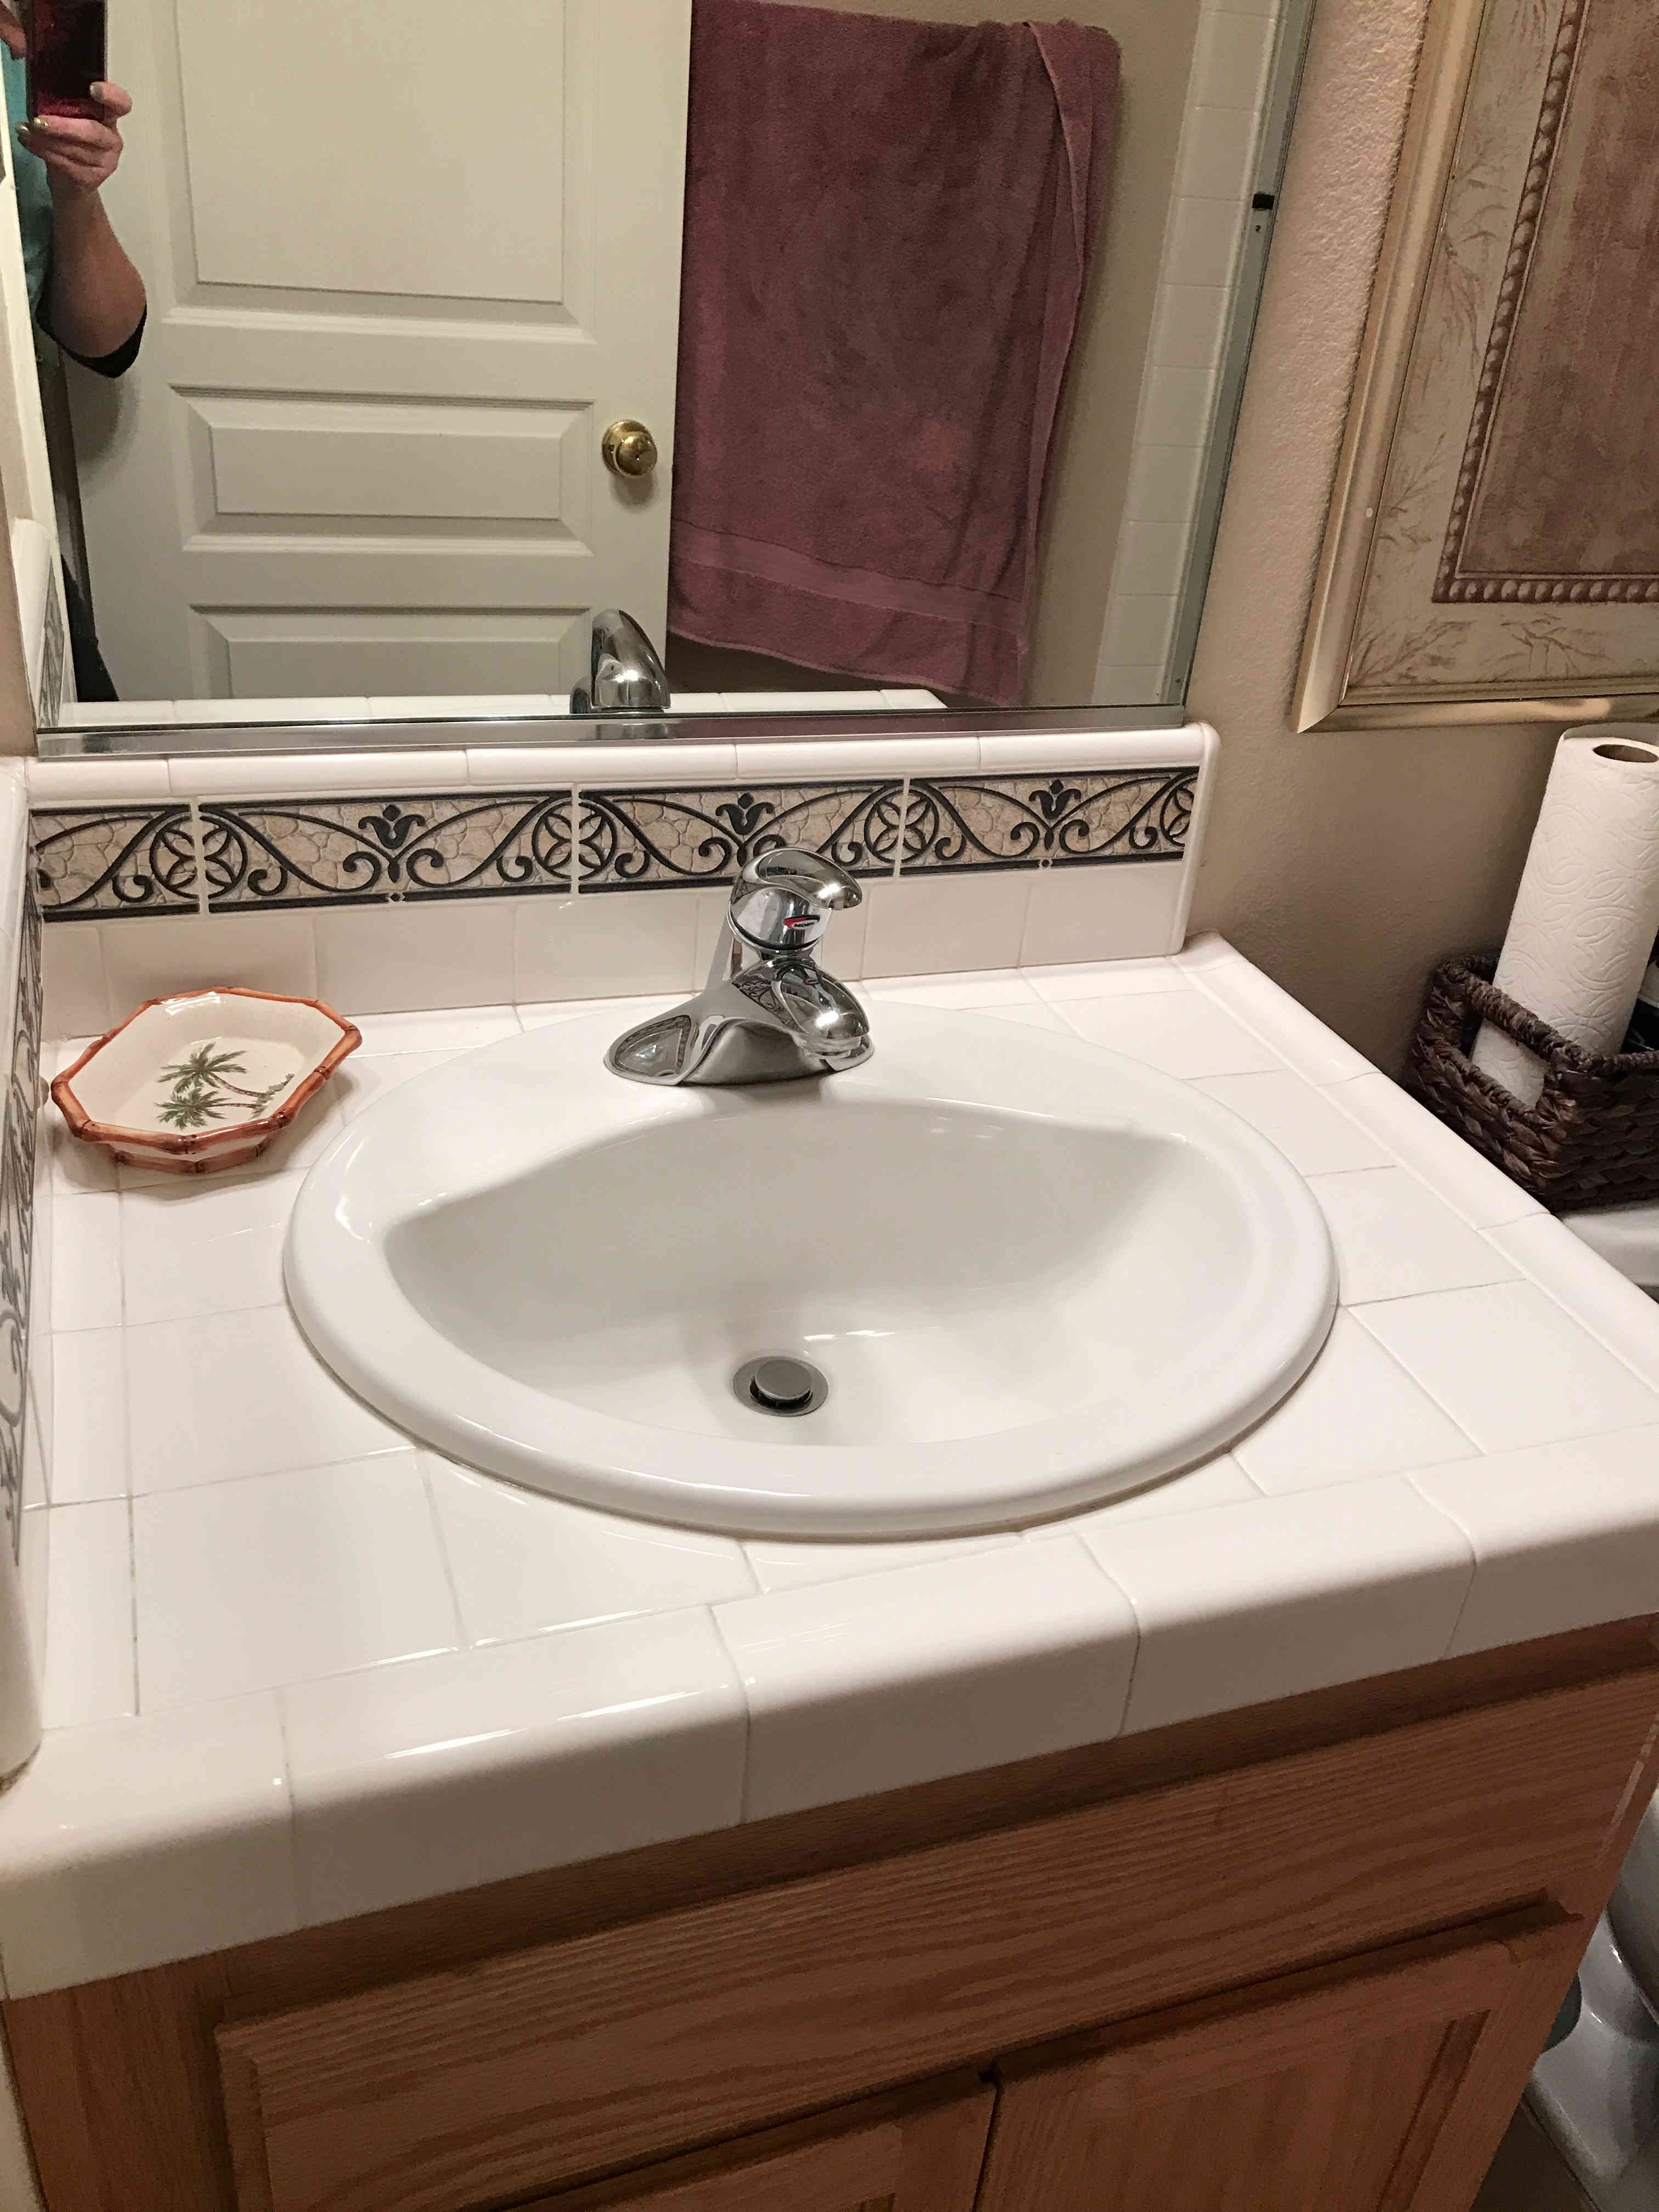 bathroom sink after being cleaned